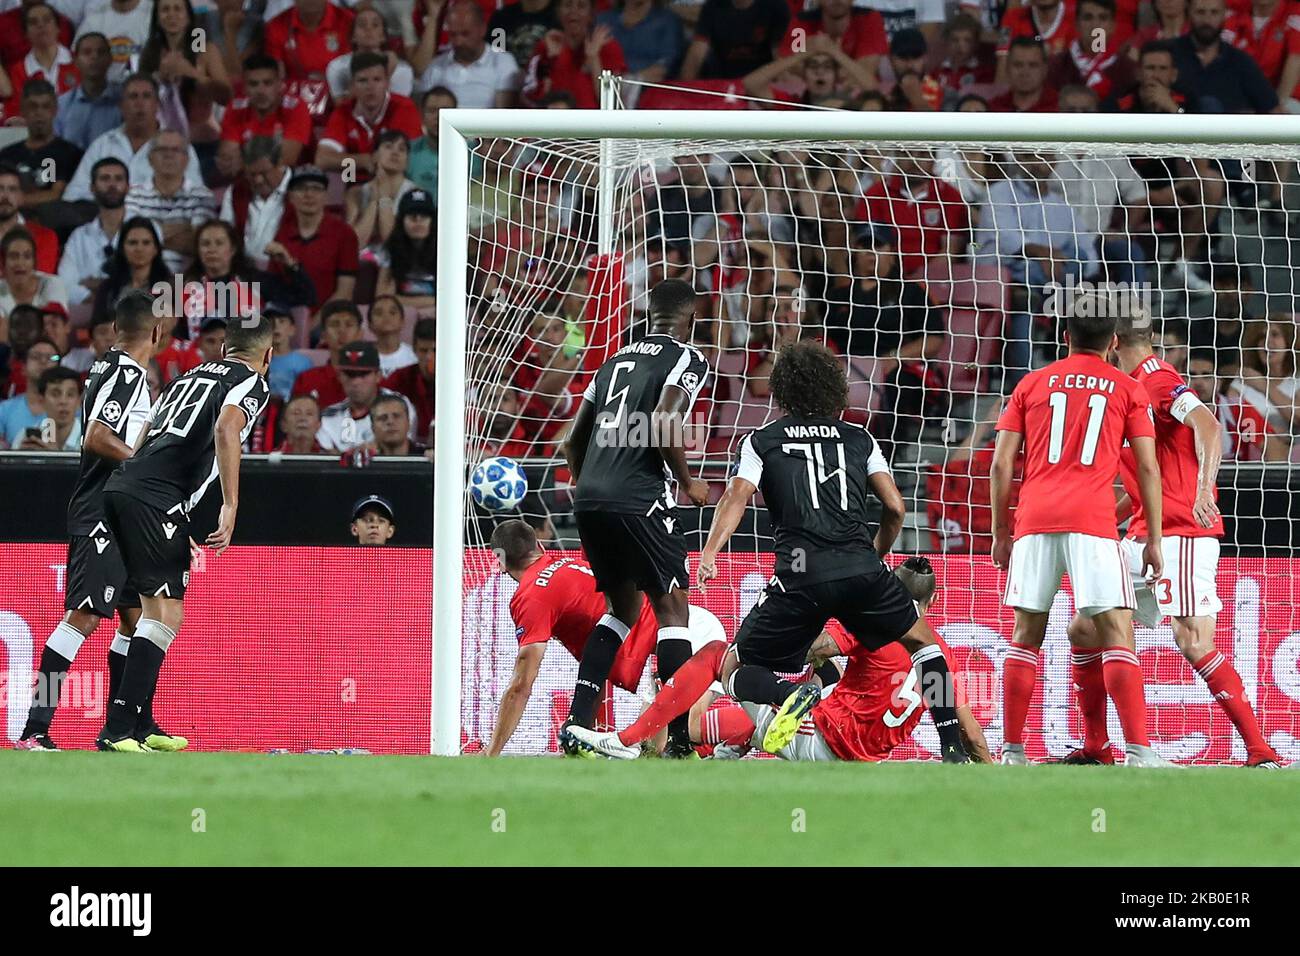 PAOK's midfielder Amr Warda (74) from Egypt shoots to score during the UEFA  Champions League play-off first leg match SL Benfica vs PAOK FC at the Luz  Stadium in Lisbon, Portugal on